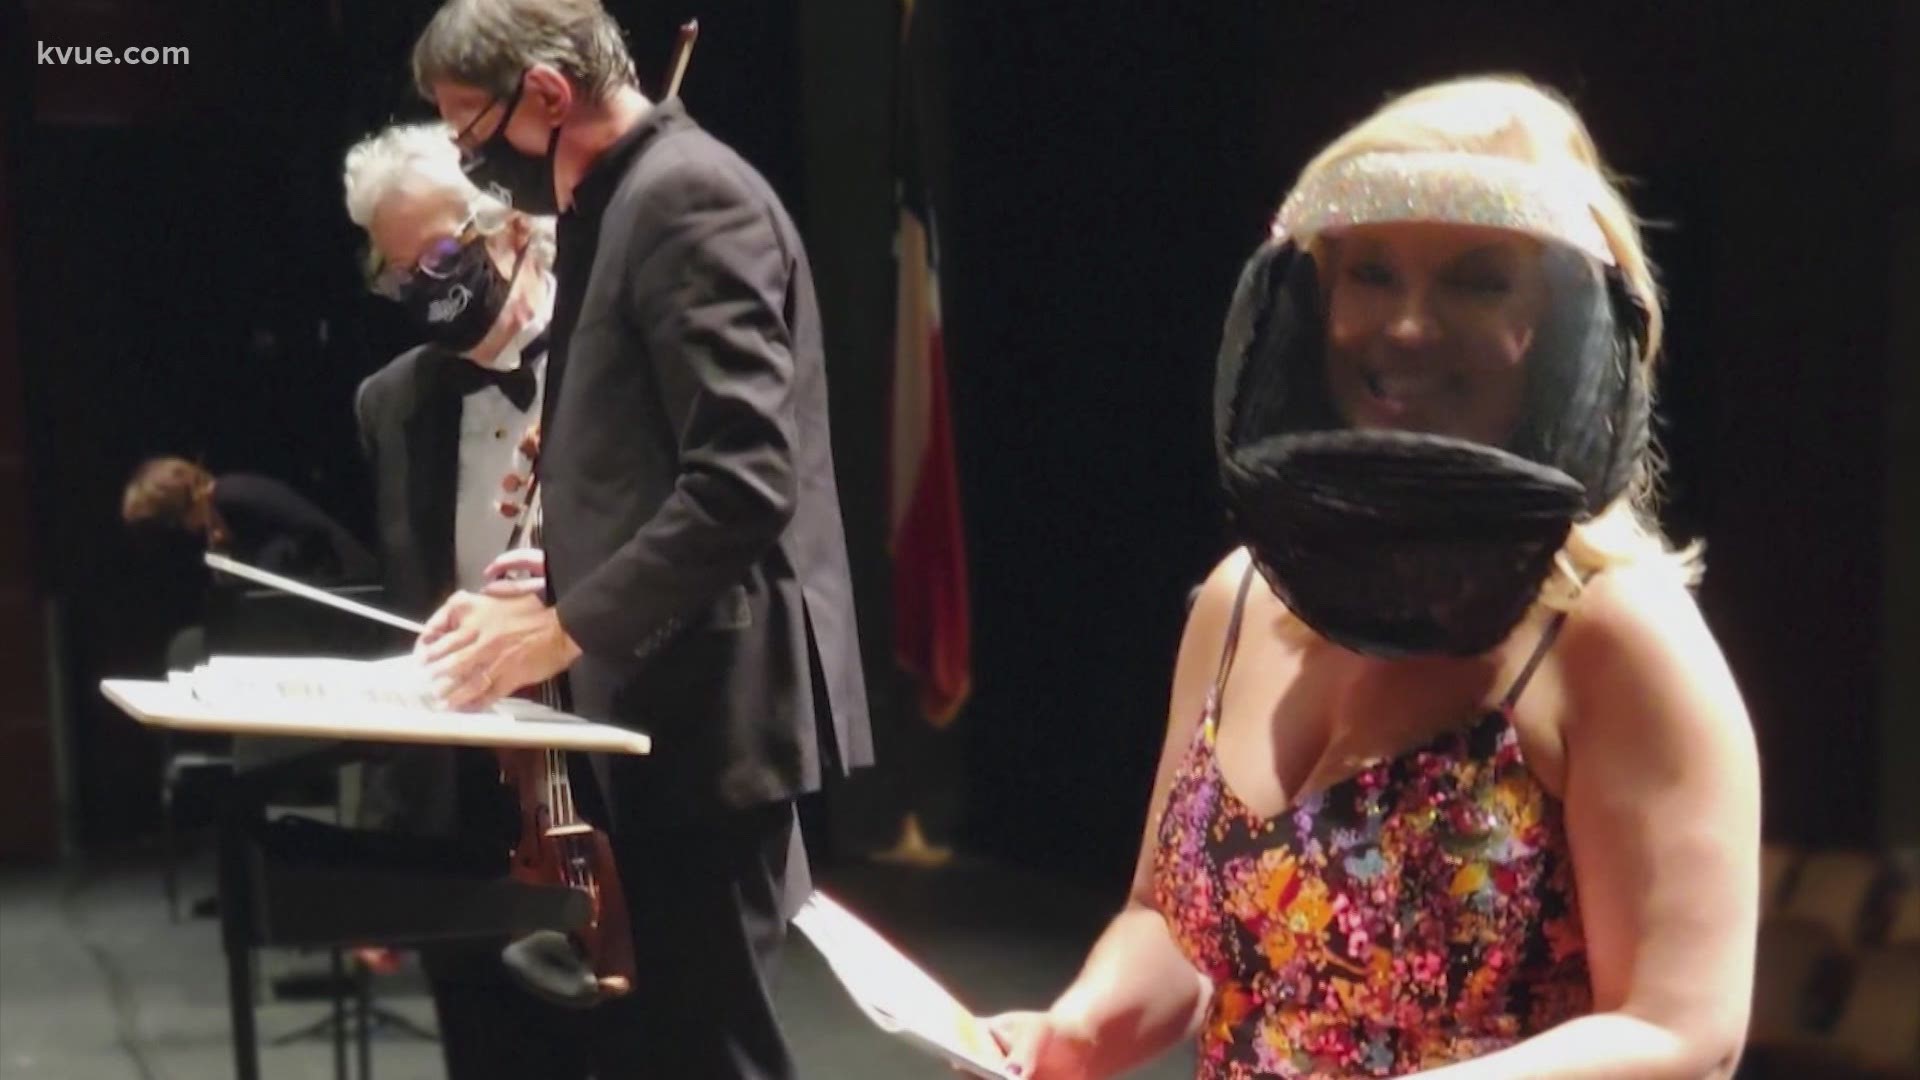 Amid the pandemic the Austin Symphony Orchestra has adapted to create a live virtual concert. The symphony is one of the few orchestras in the U.S. making music.